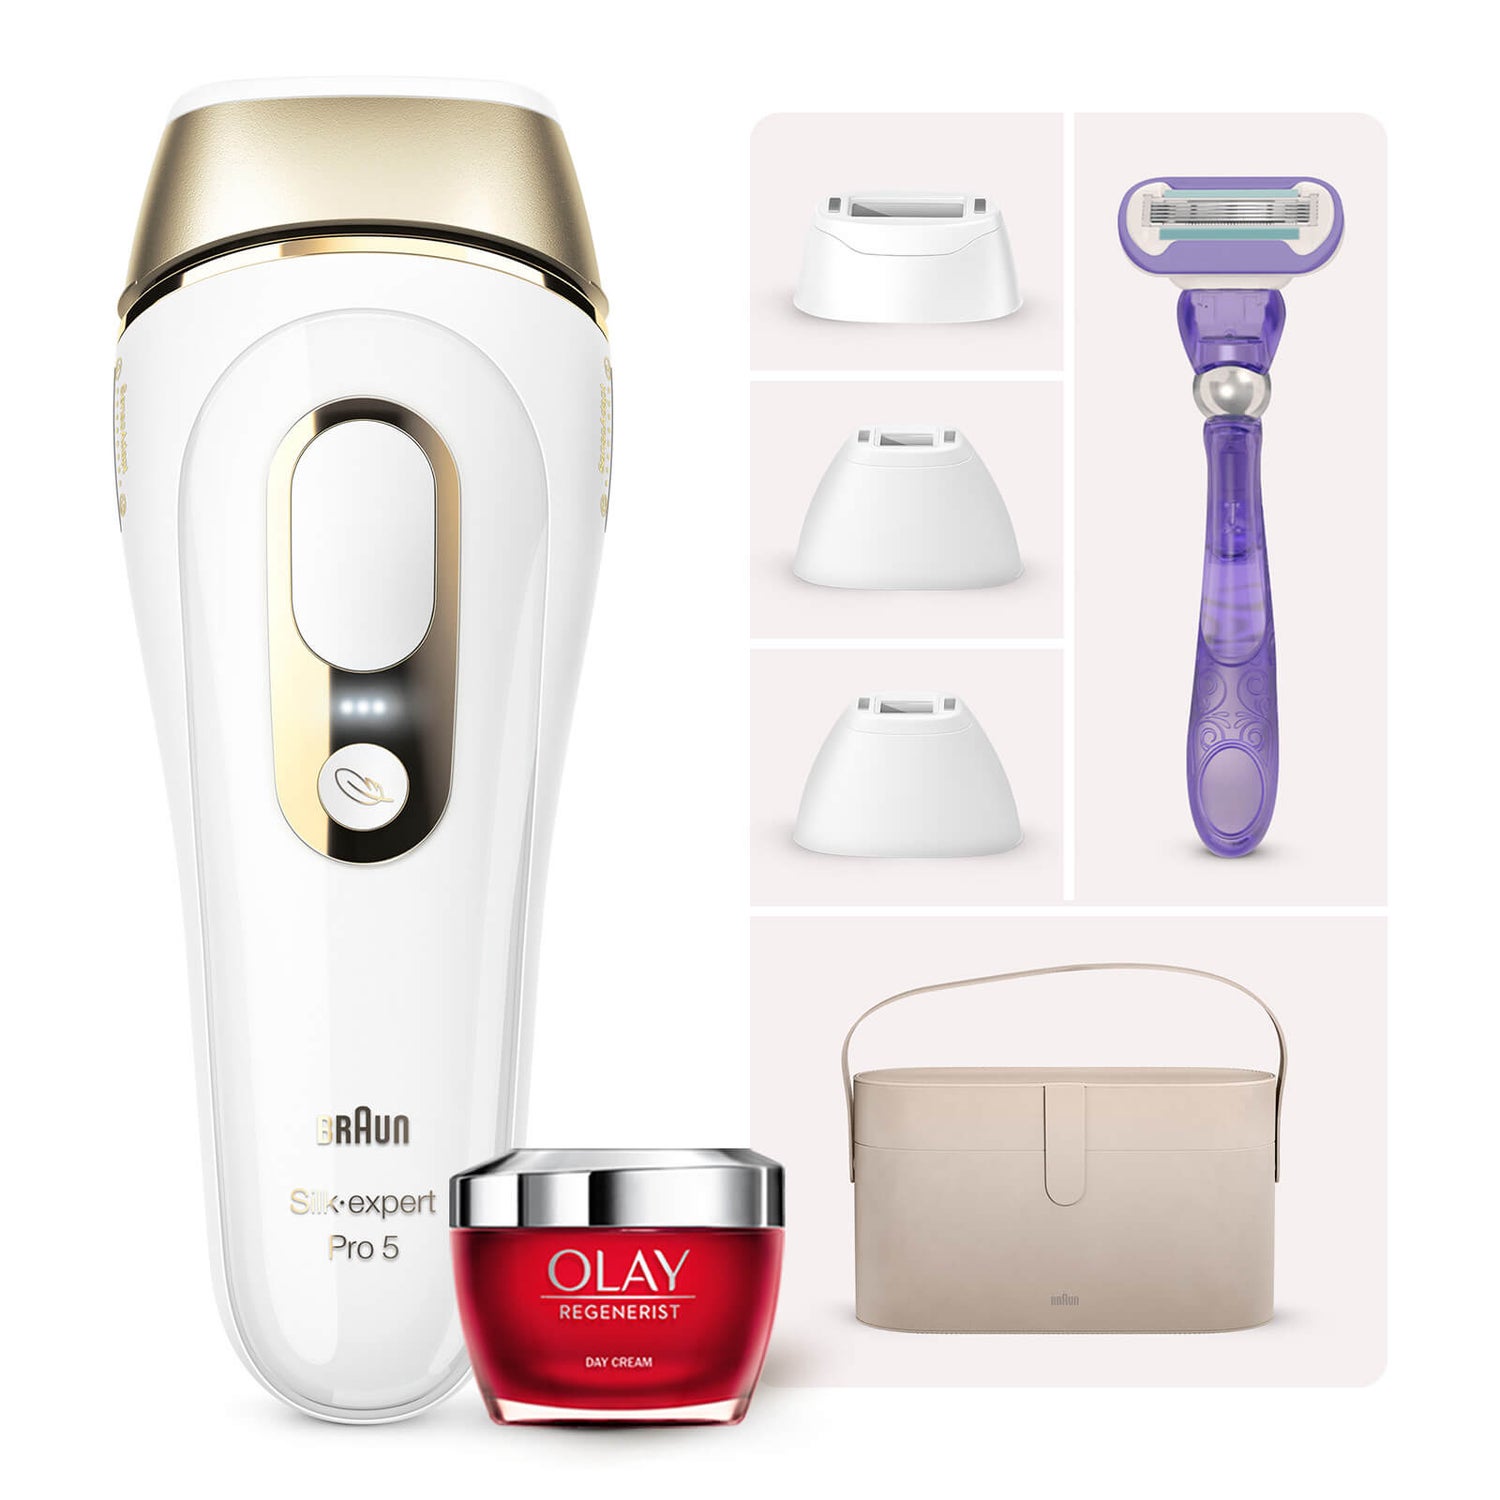 Braun Silk-expert Pro 5 IPL with 3 Heads, Razor and Deluxe Pouch